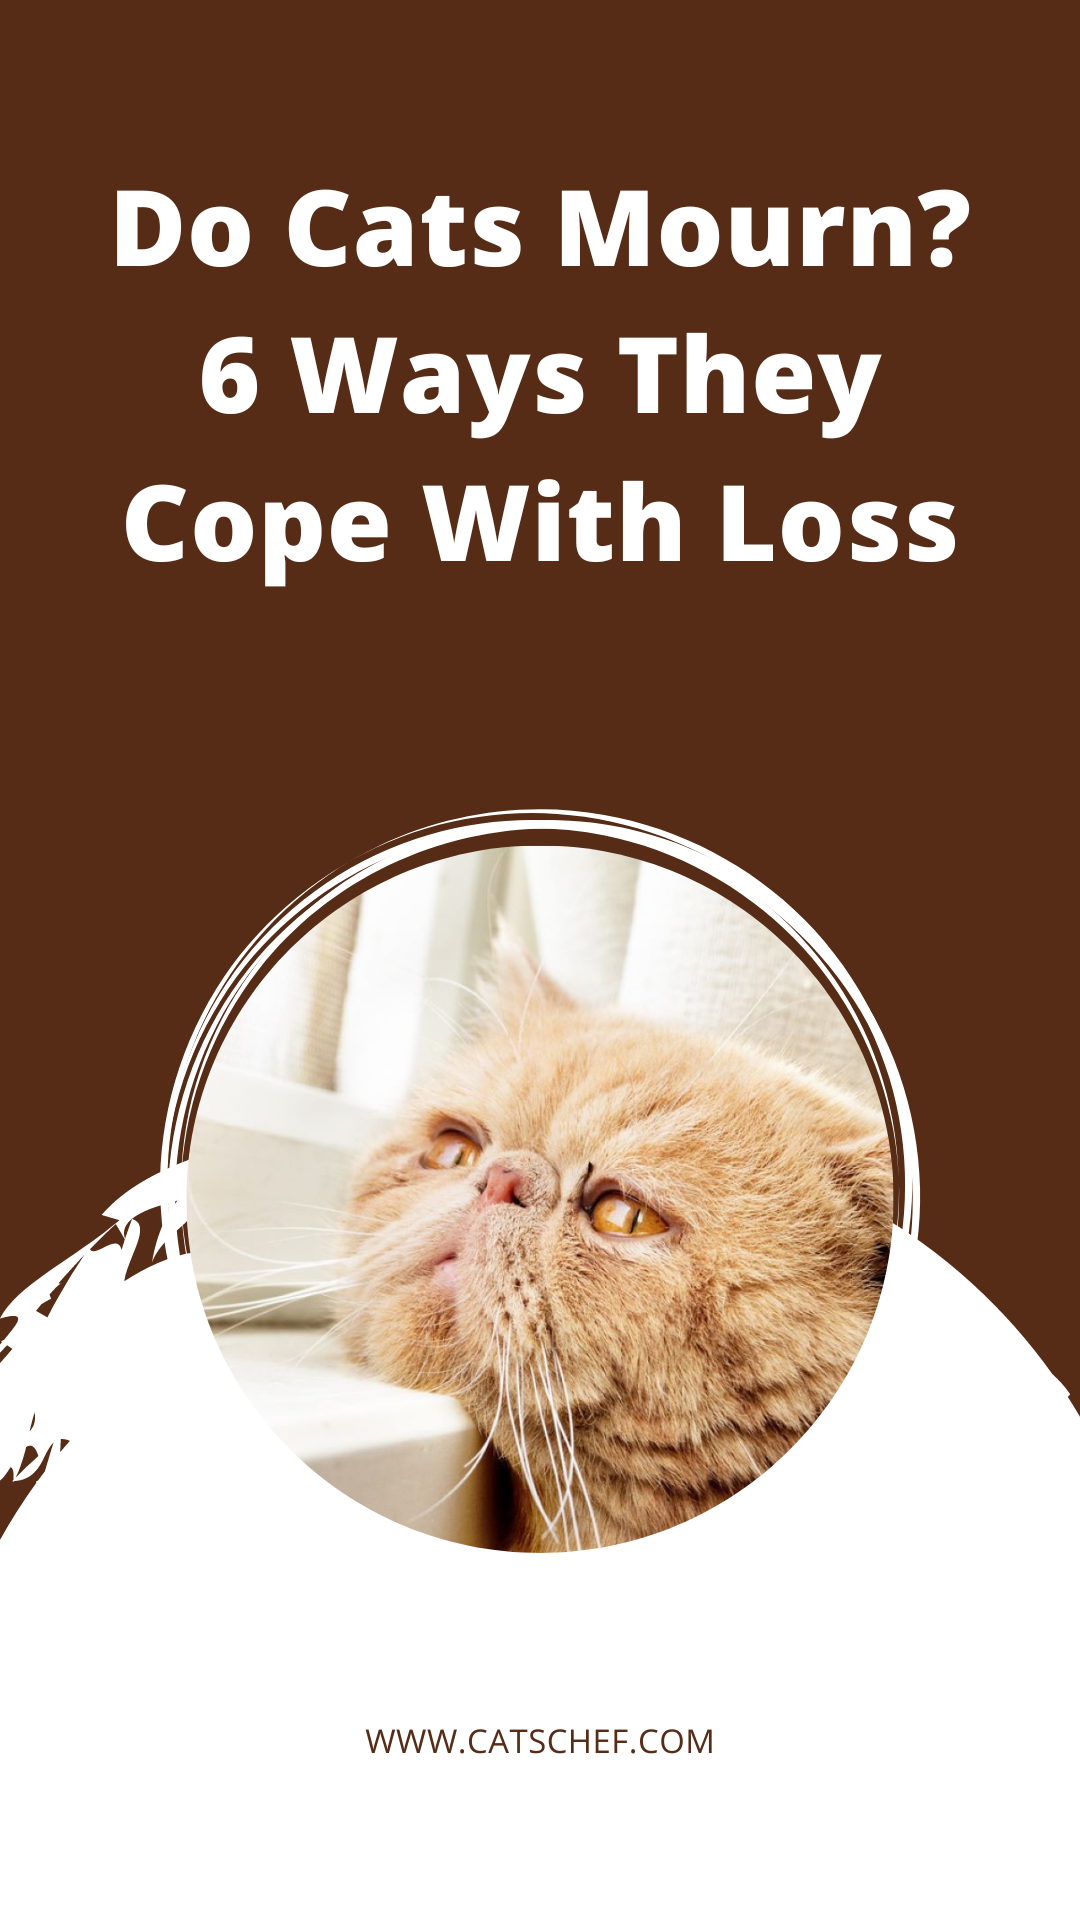 Do Cats Mourn? 6 Ways They Cope With Loss